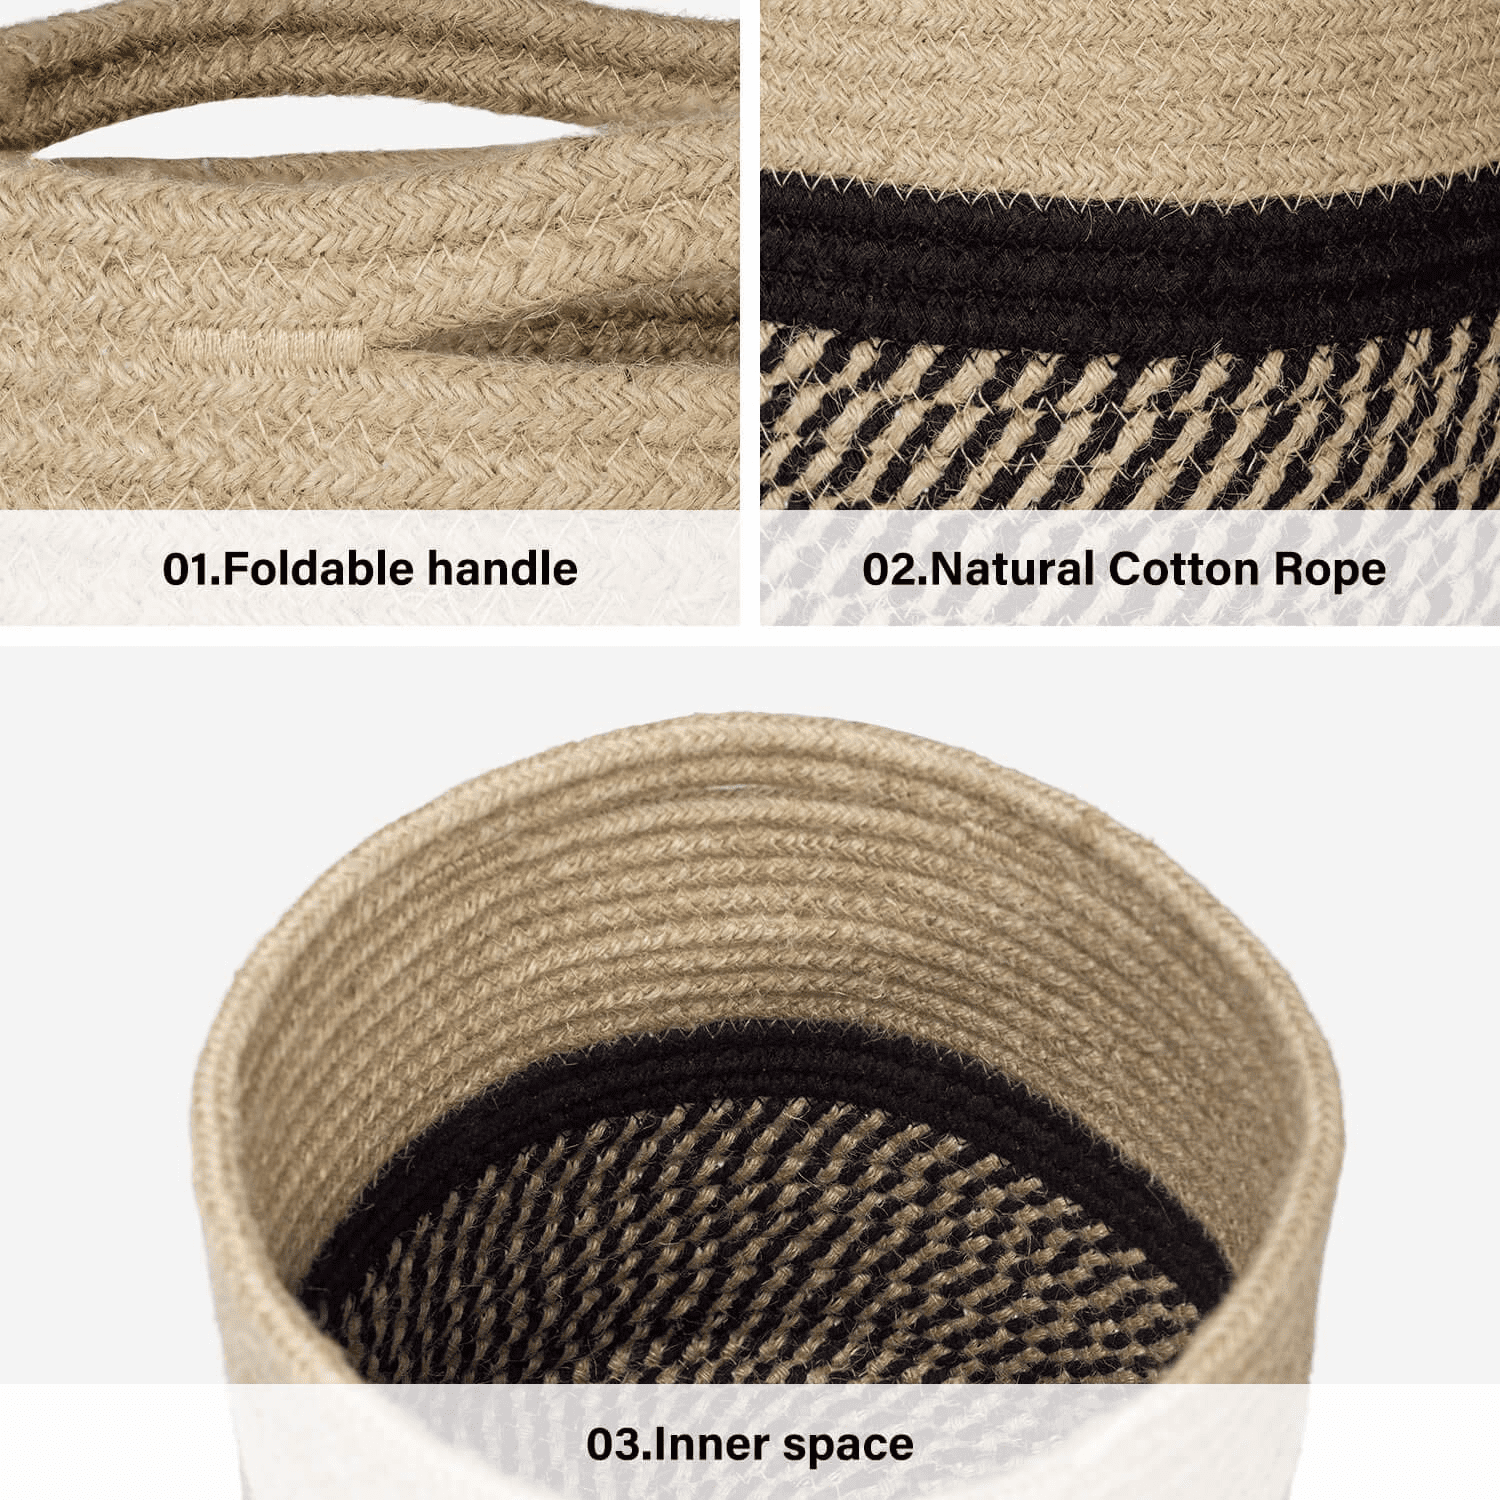 ZOUTOG Woven Cotton Rope Basket Indoor Planter Cover Up to 10 Inch Pot Storage Organizer with Handles Plant Basket 11 x 11 